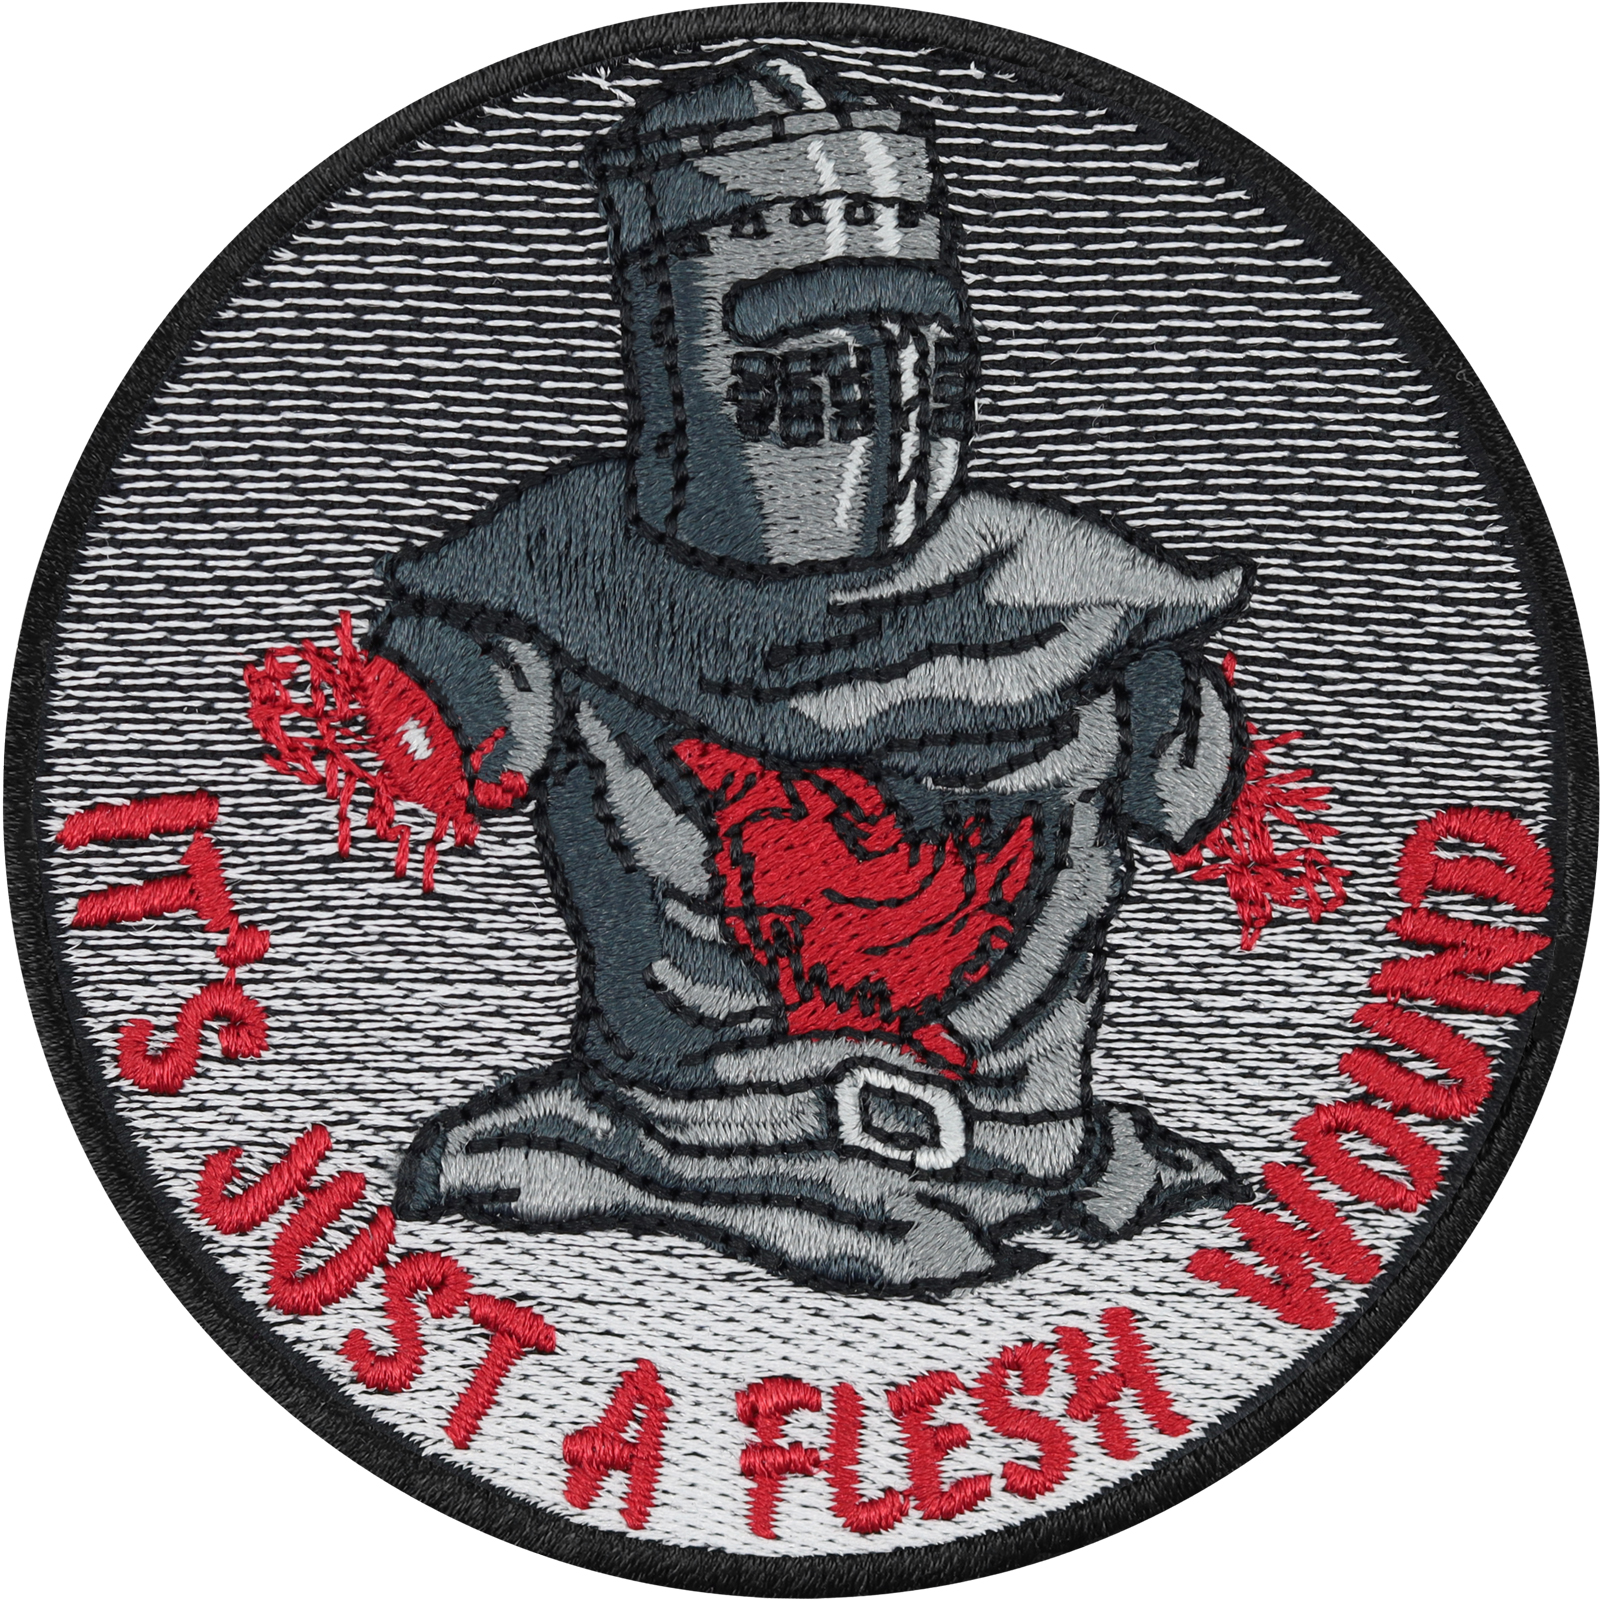 It's just a flesh wound - Patch